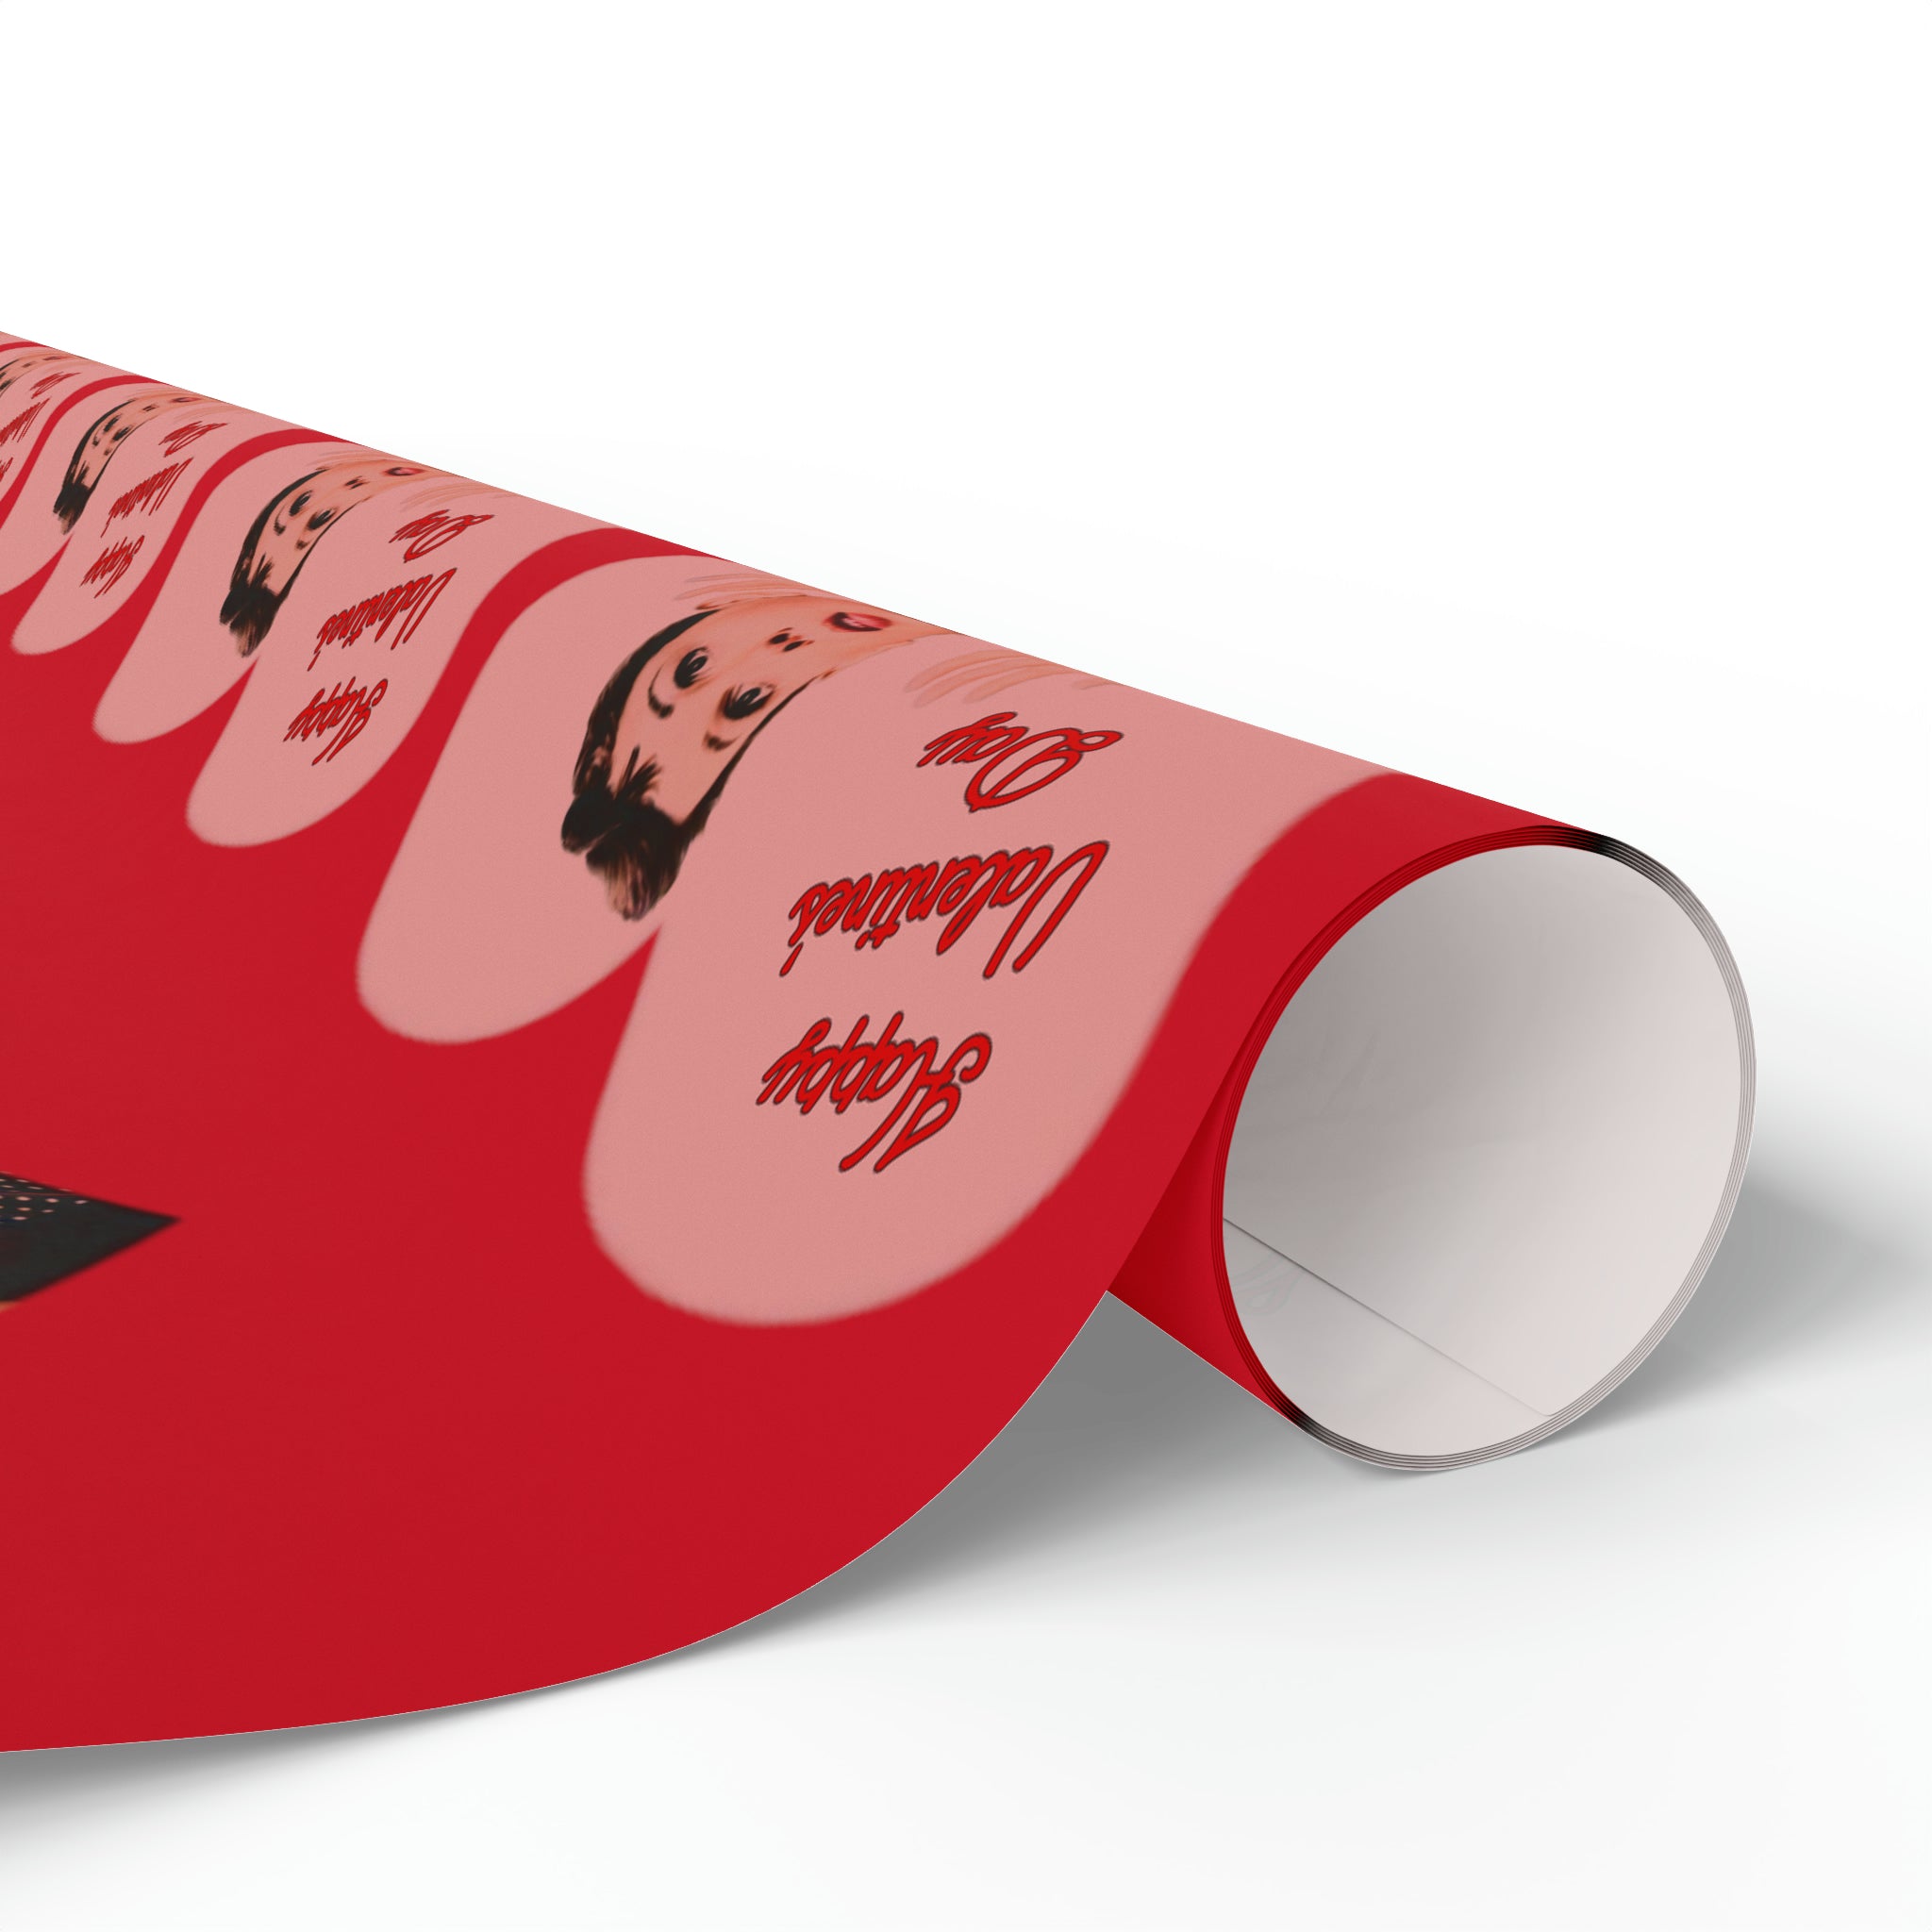 Judy Garland Valentine's Day Wrapping Paper